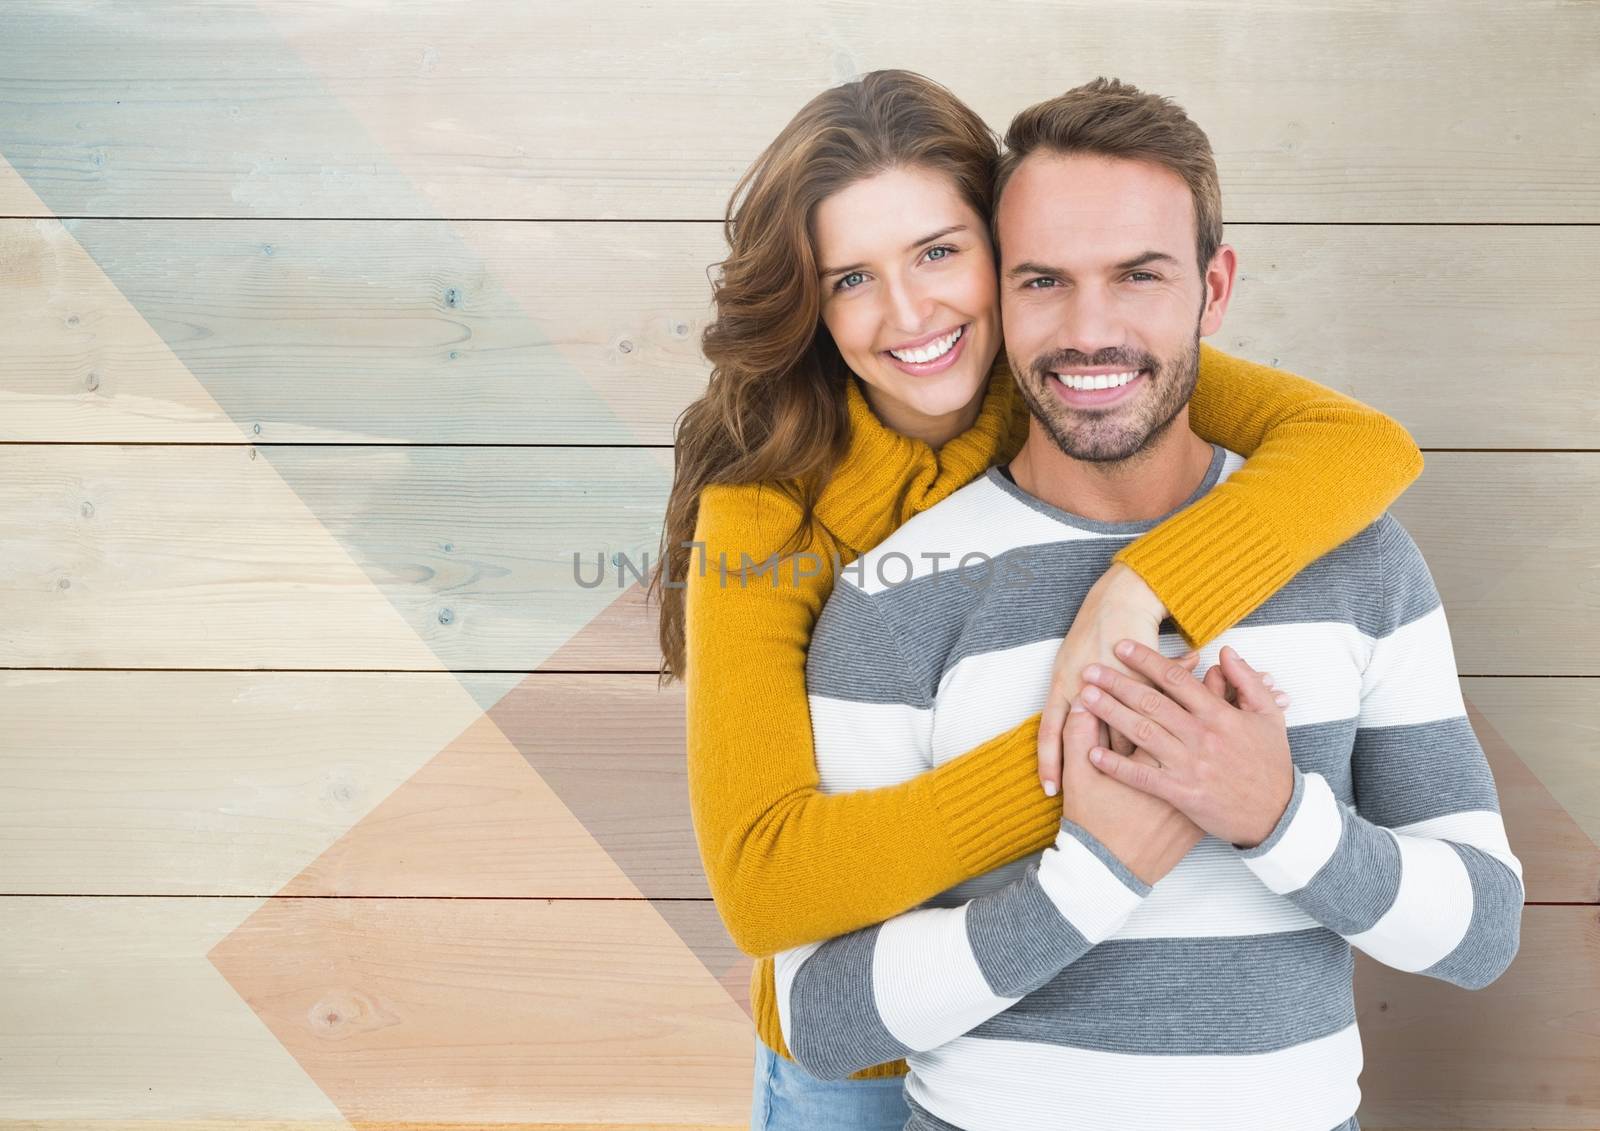 Portrait of romantic couple embracing each other against wooden background